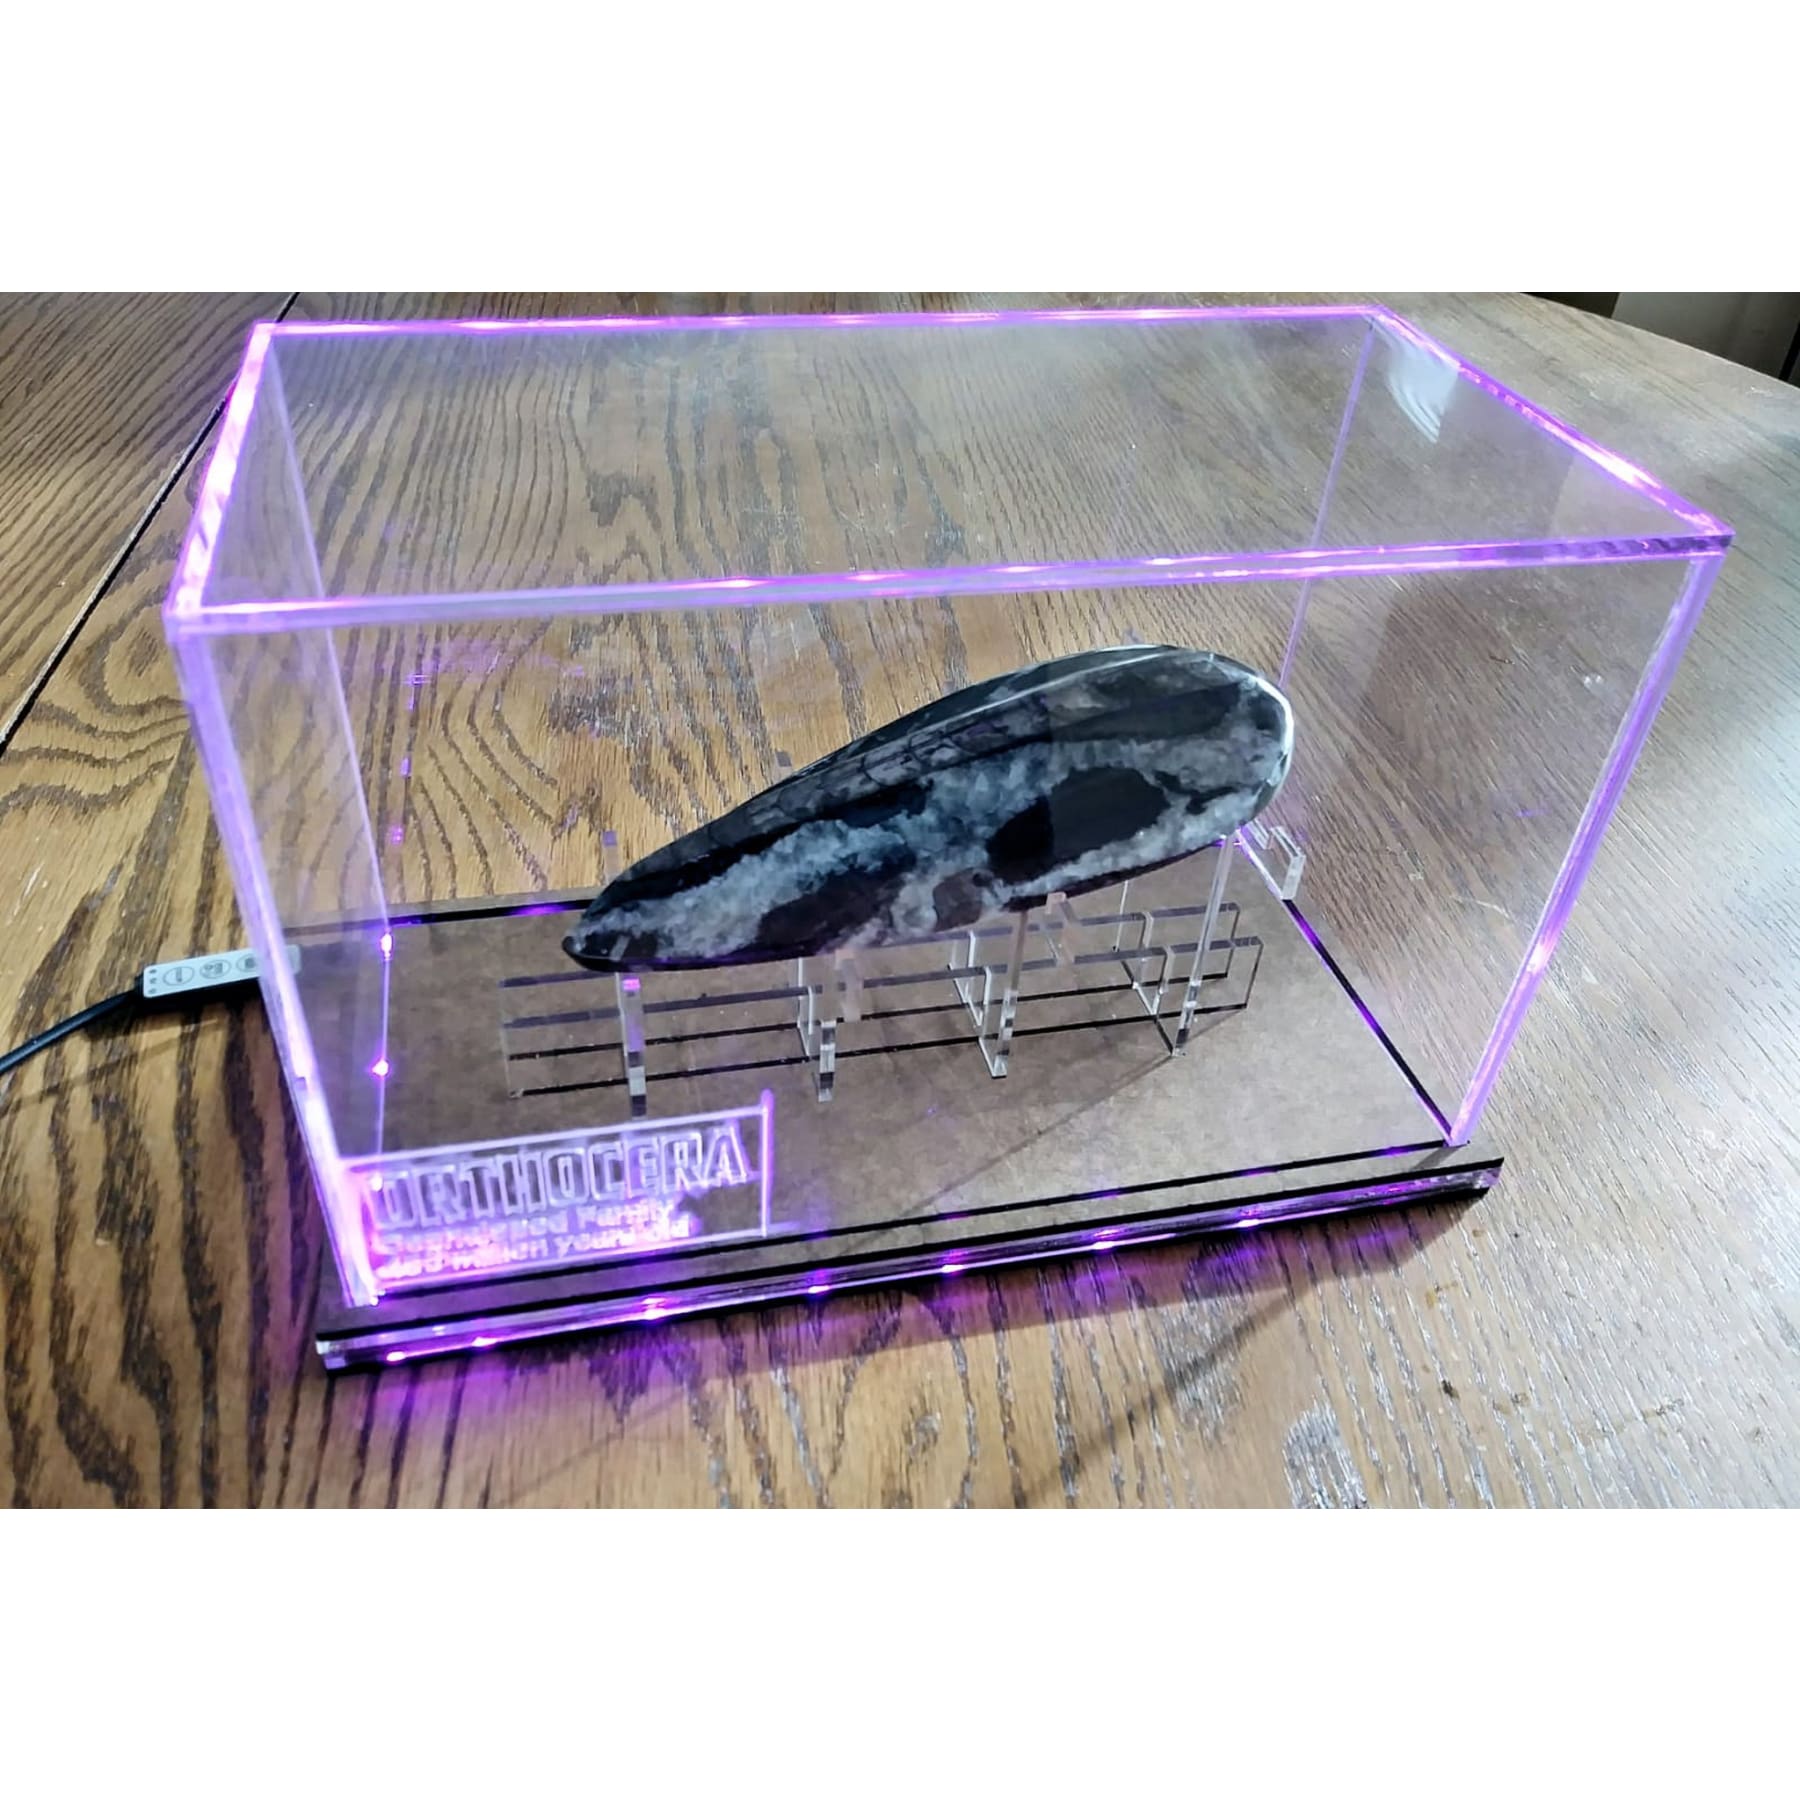 Acrylic LED Display Case for Fossils with Stand, custom made